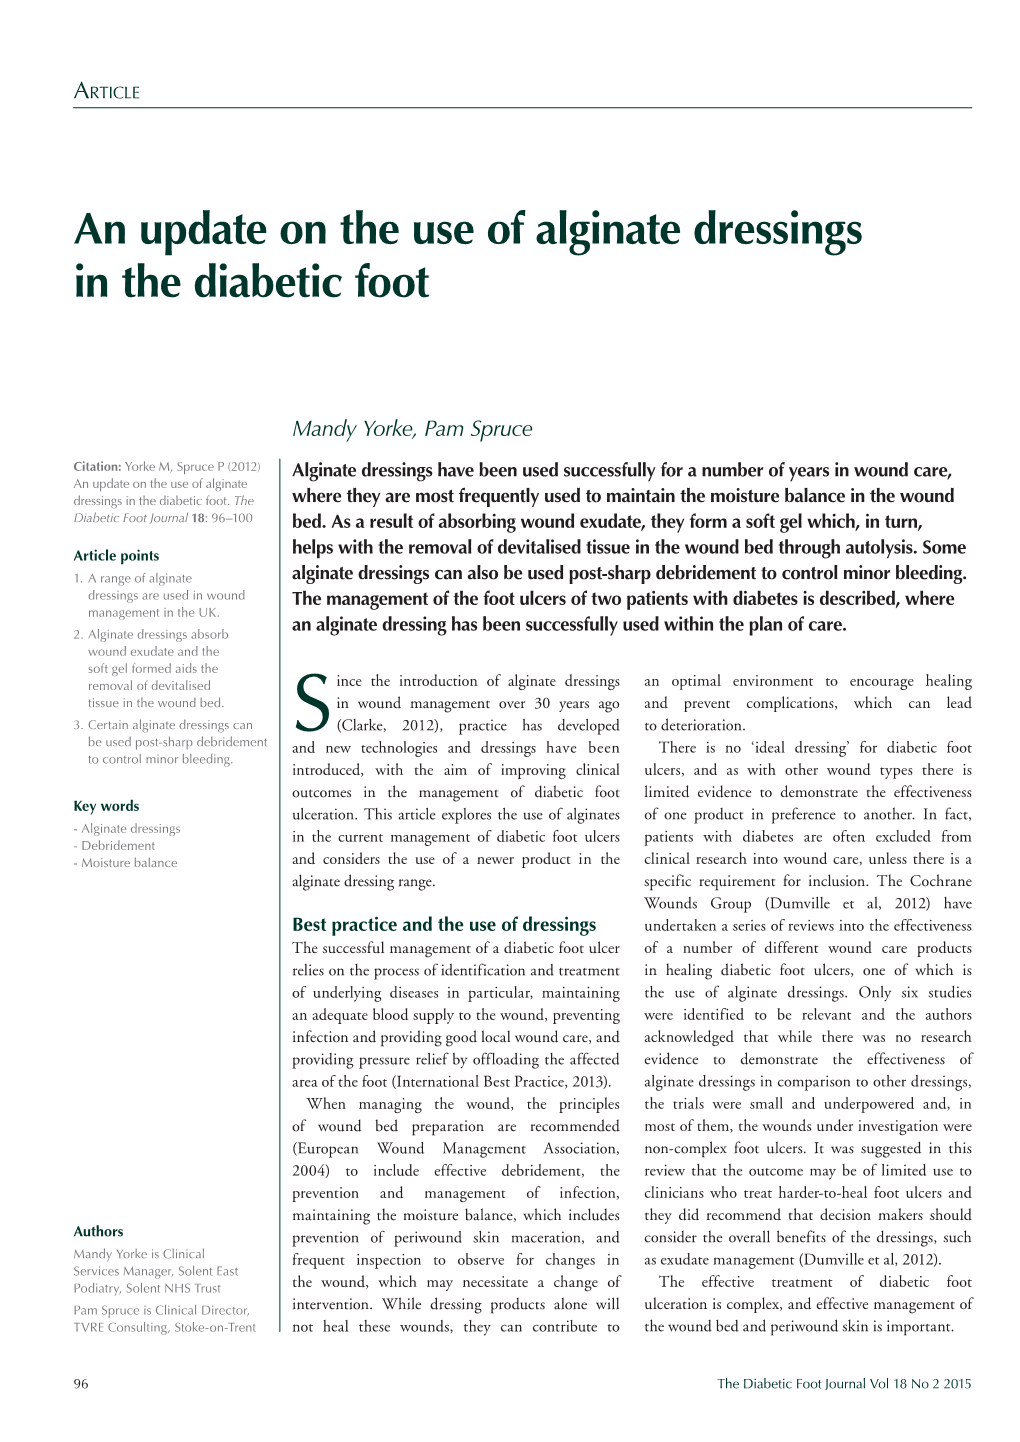 An Update on the Use of Alginate Dressings in the Diabetic Foot